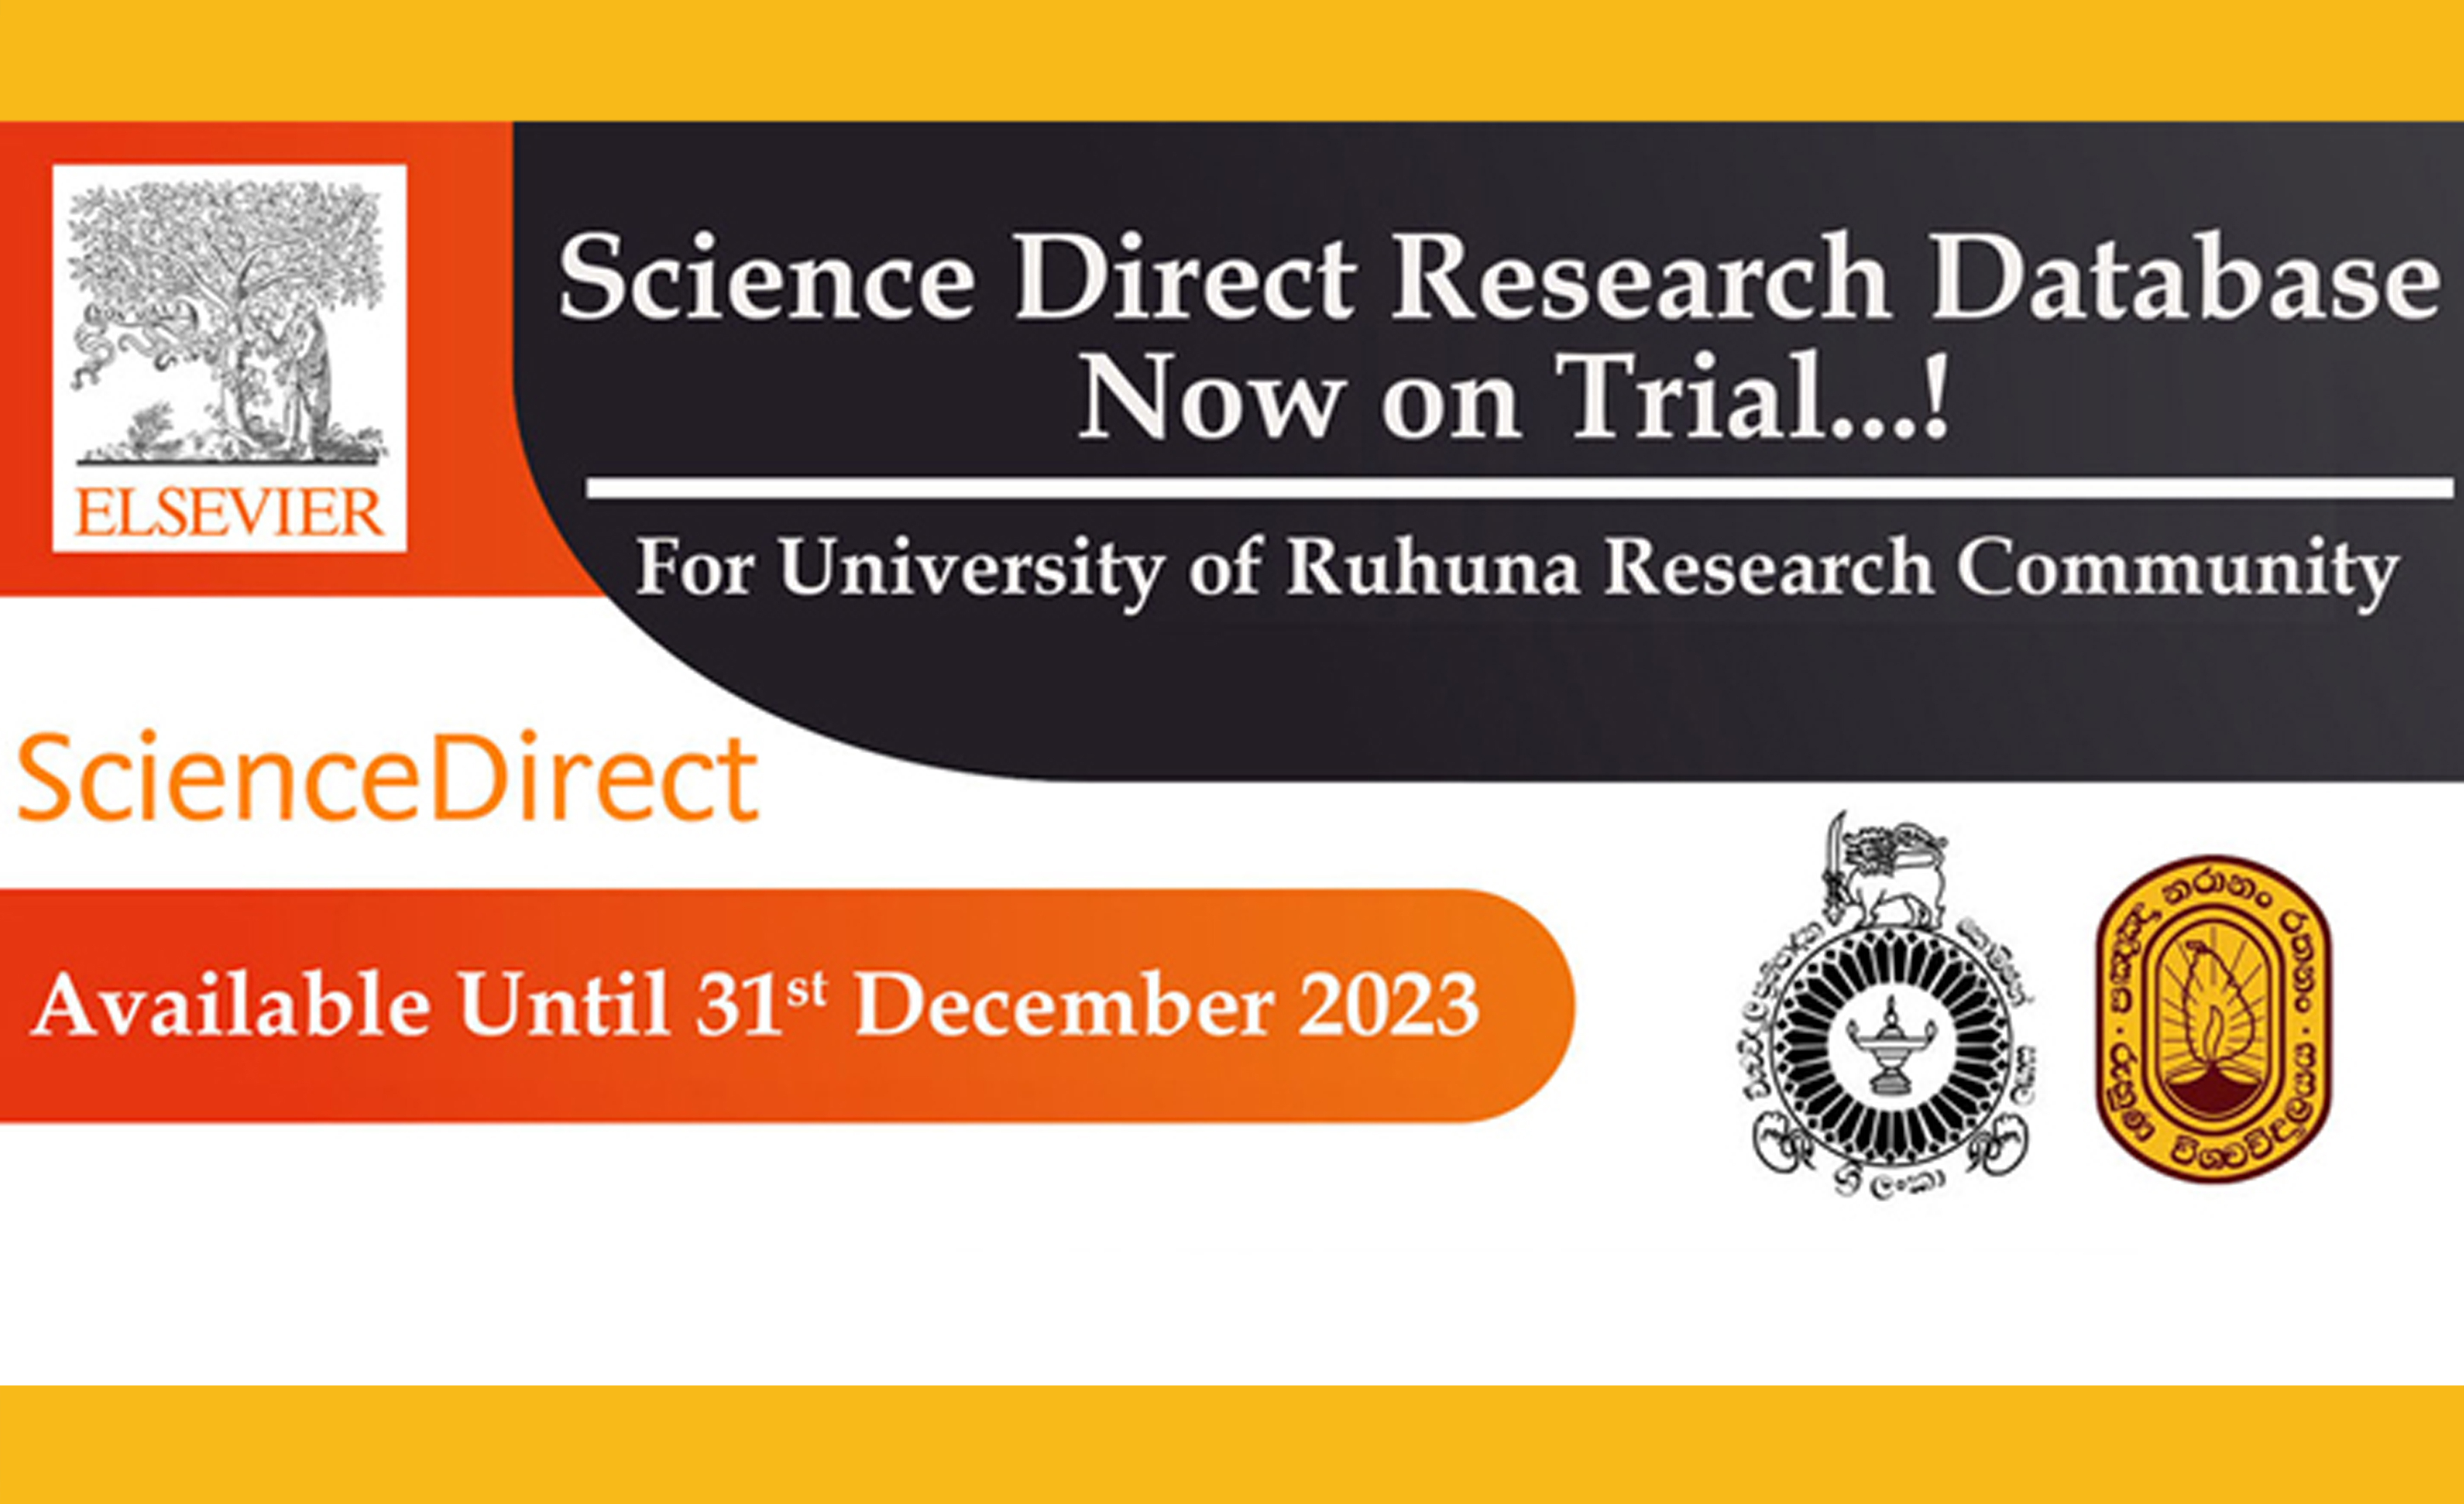 Science Direct Research Database is now on Trial..!